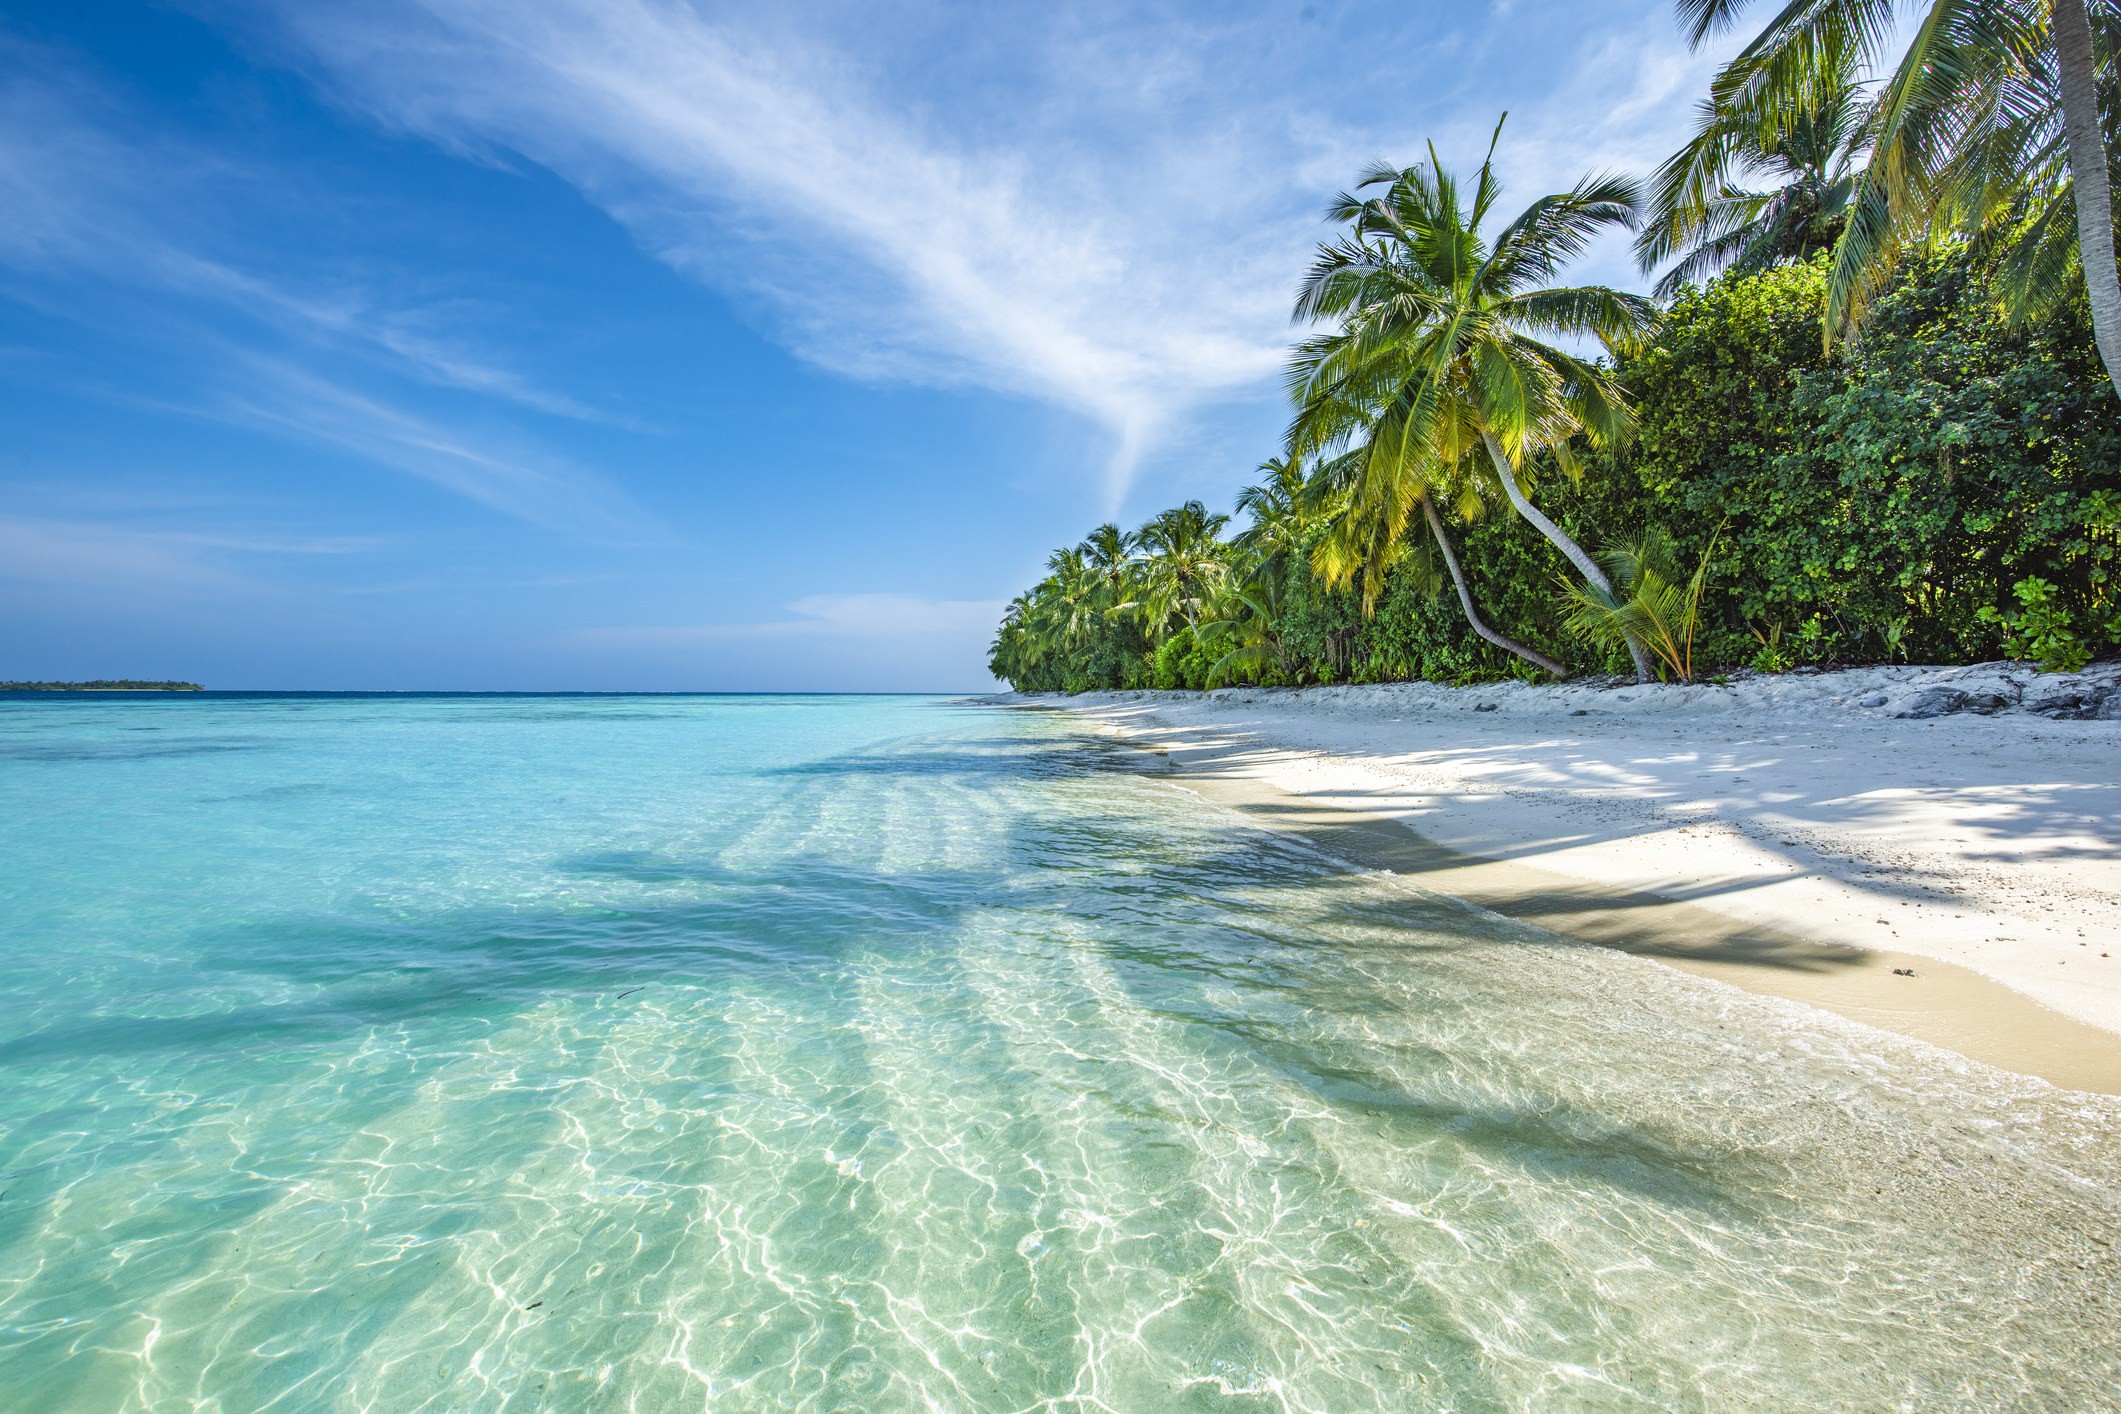 Crystal clear water with palm trees.